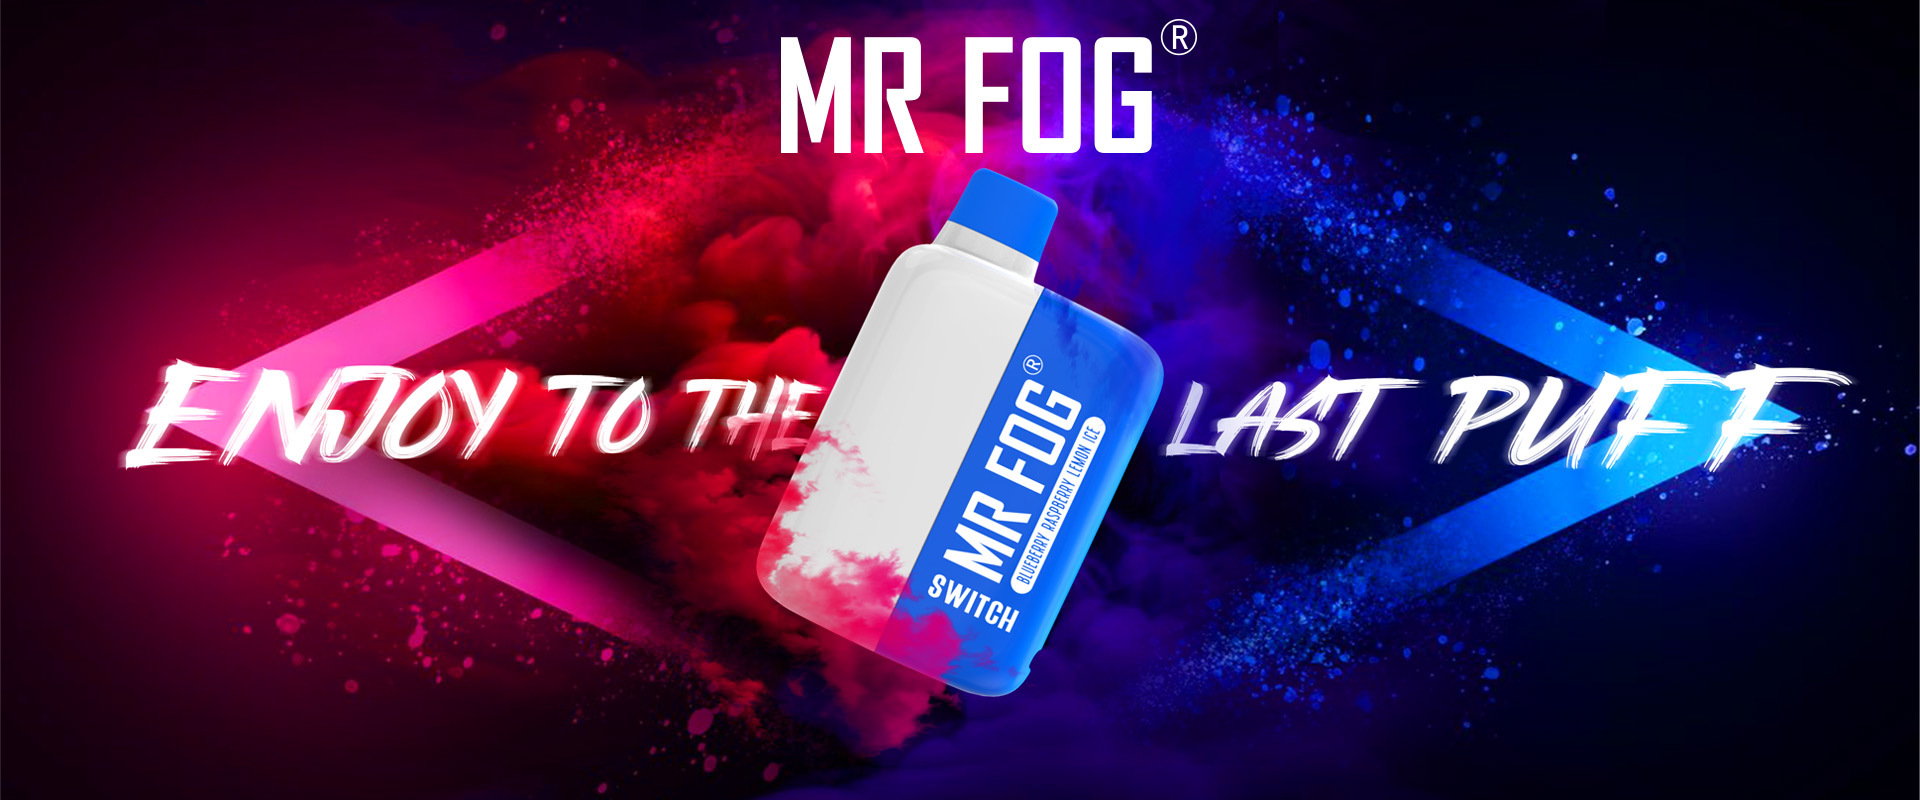 Mr Fog disposable vapes are a convenient and user-friendly vaping option. With their pre-filled e-liquid, nicotine salts formulation, variety of flavors, and built-in battery, they offer a satisfying vaping experience without the hassle of maintaining a traditional e-cigarette.